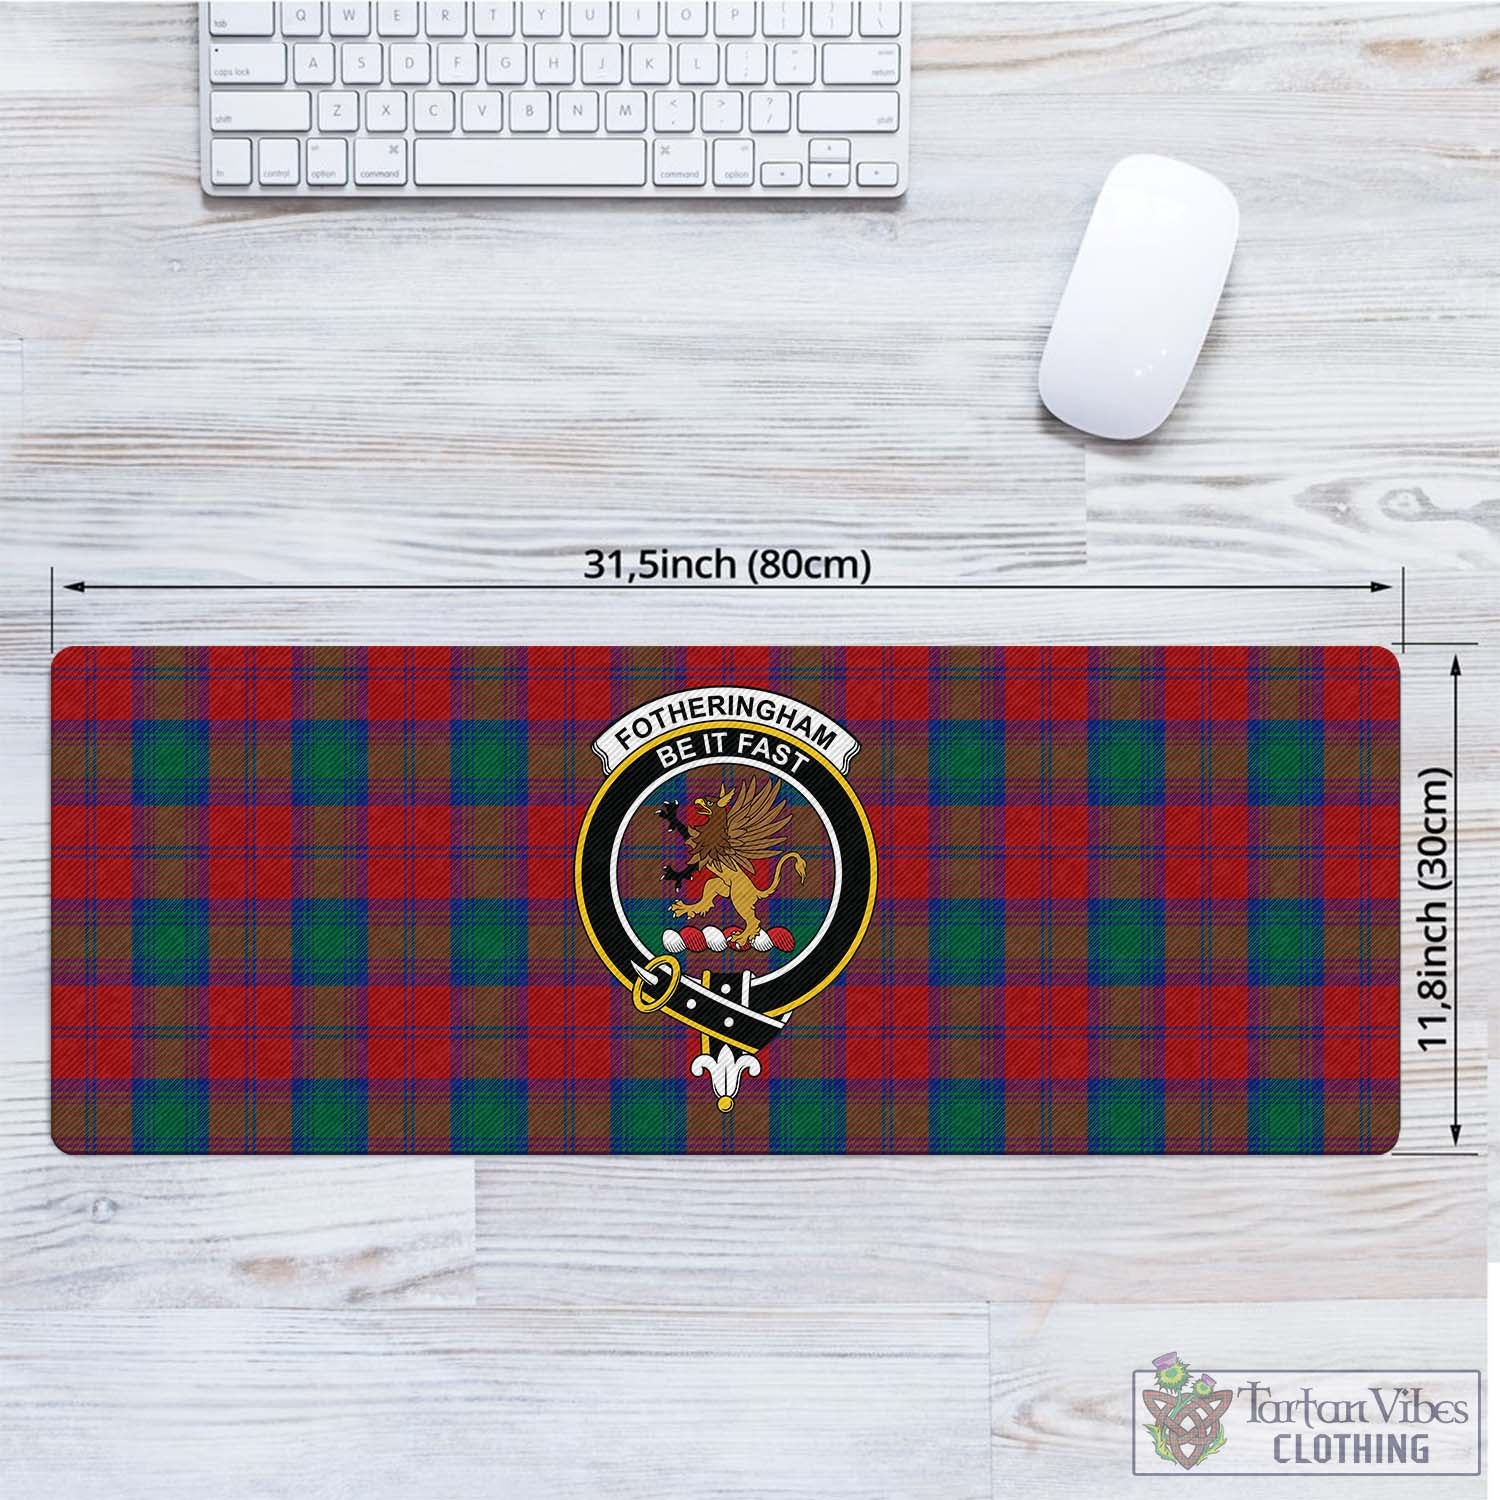 Tartan Vibes Clothing Fotheringham Modern Tartan Mouse Pad with Family Crest